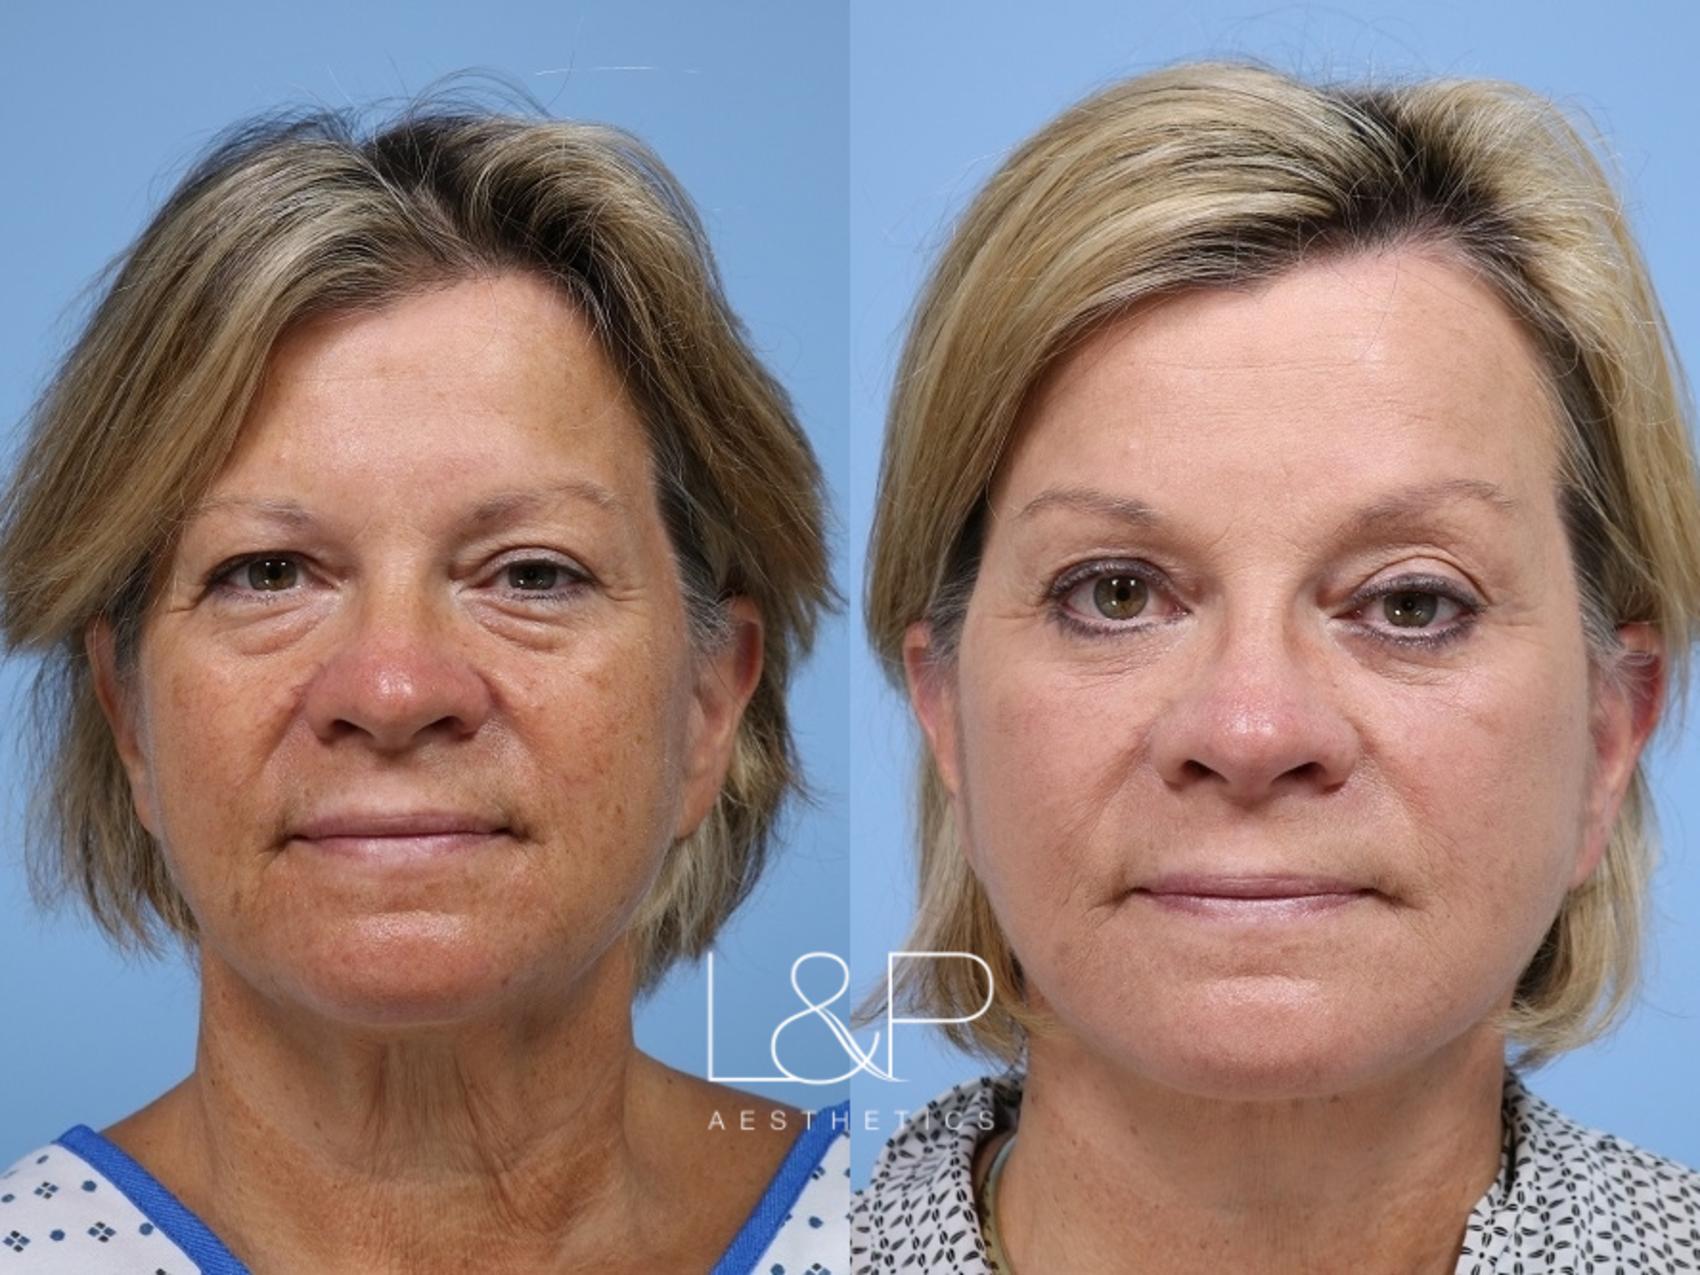 Bay Area woman takes years off her appearance with L&P Signature Facelift